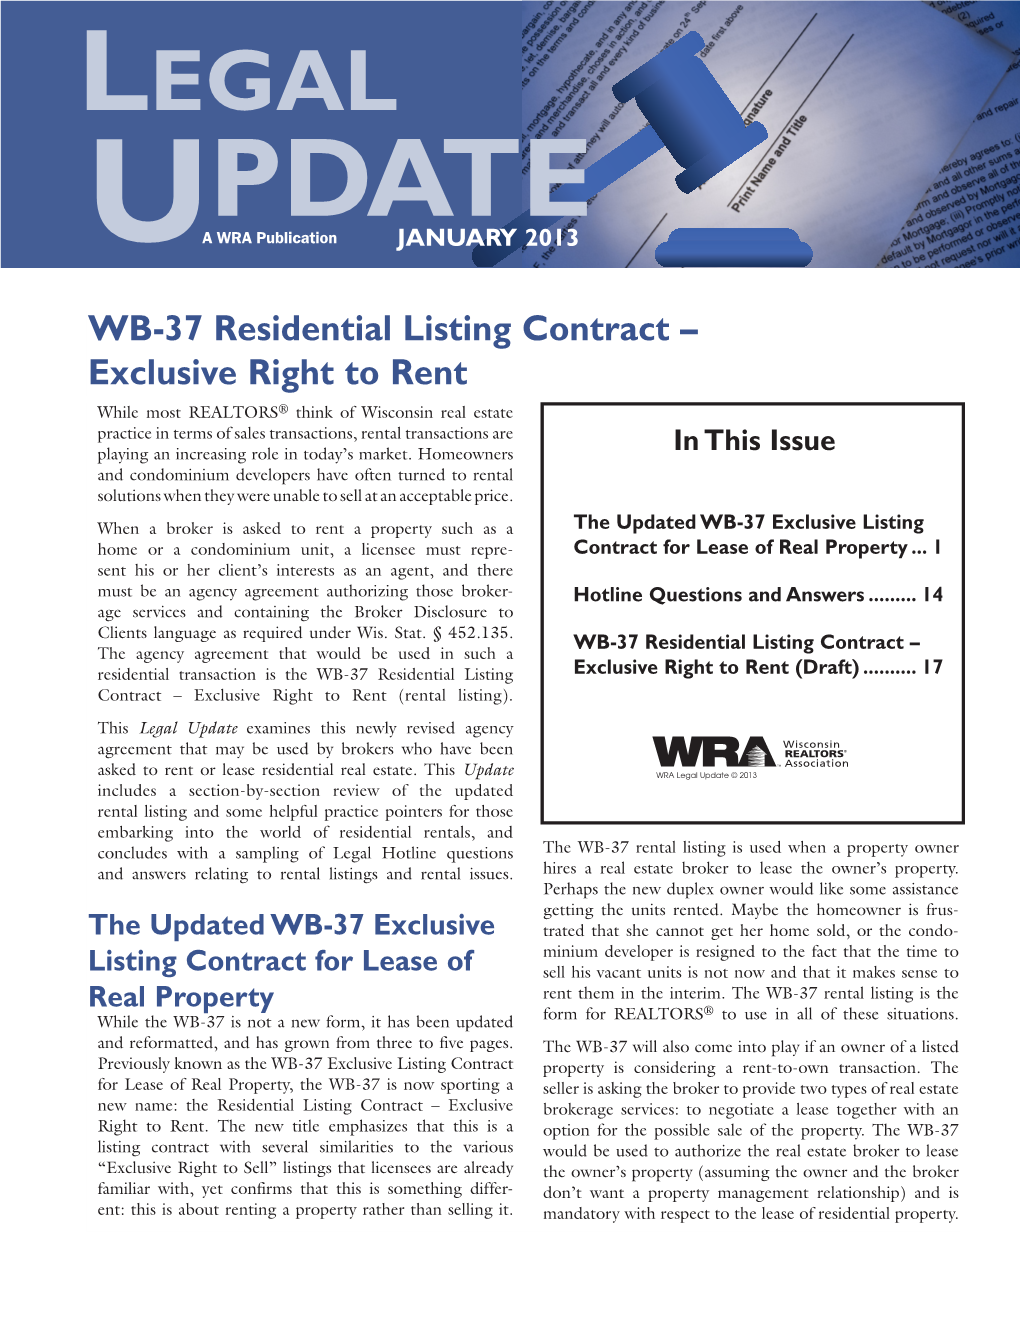 WB-37 Residential Listing Contract – Exclusive Right to Rent